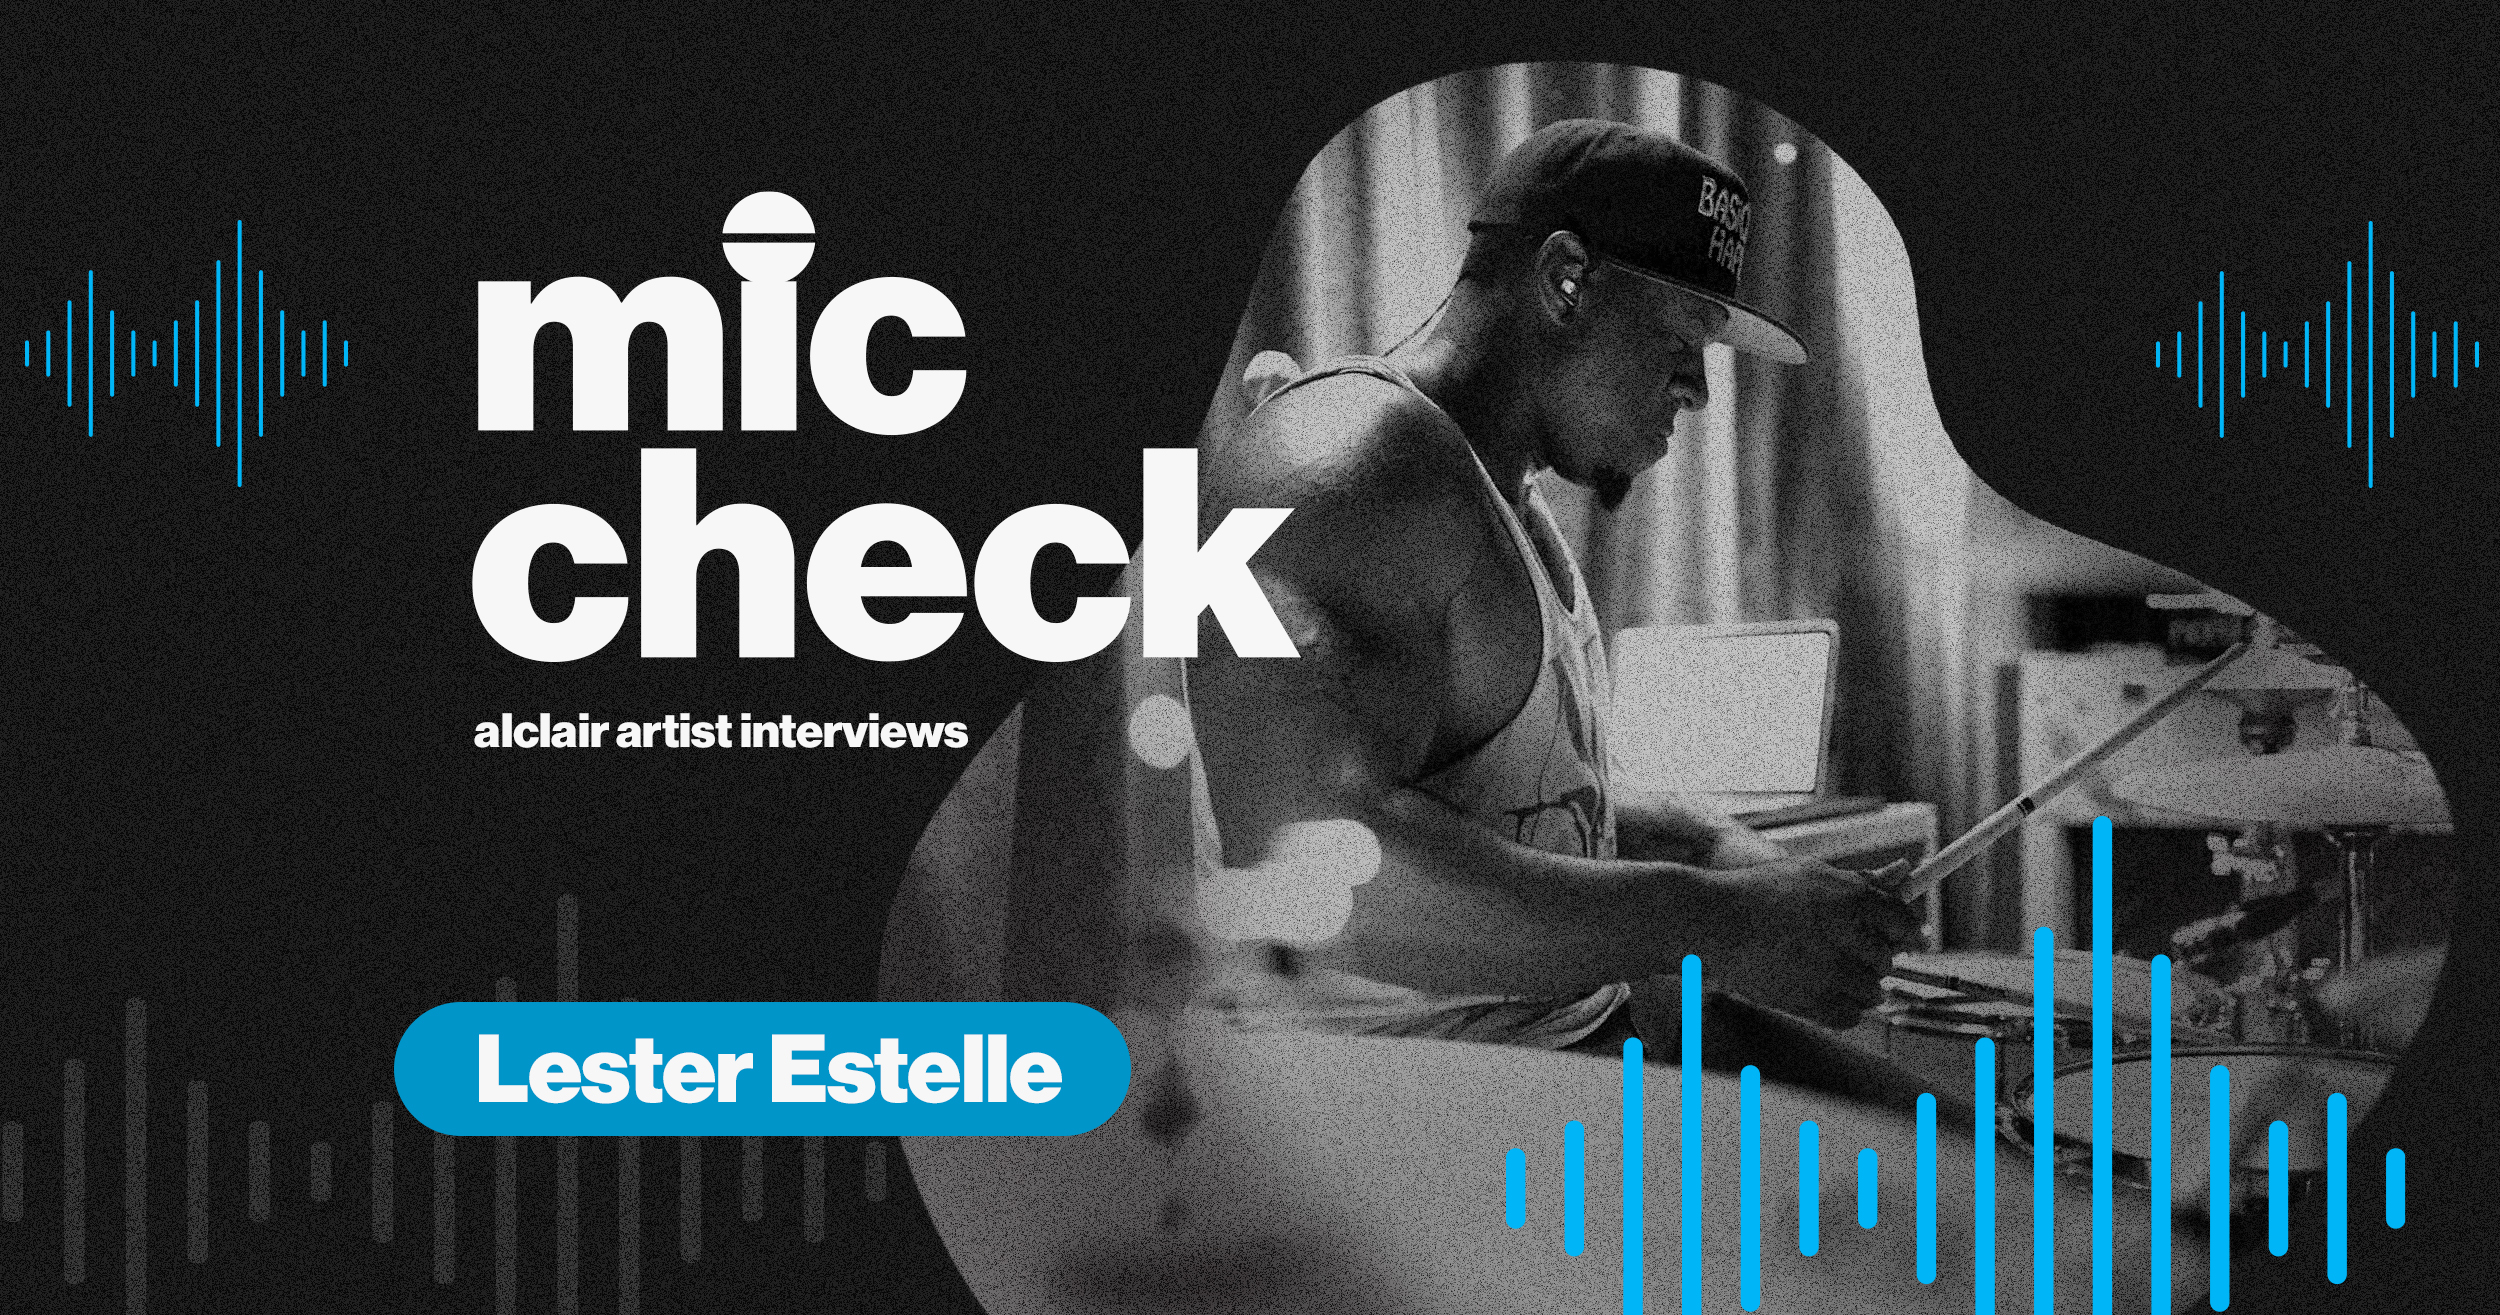 MIC CHECK: Drummer Extraordinaire and MD Lester Estelle